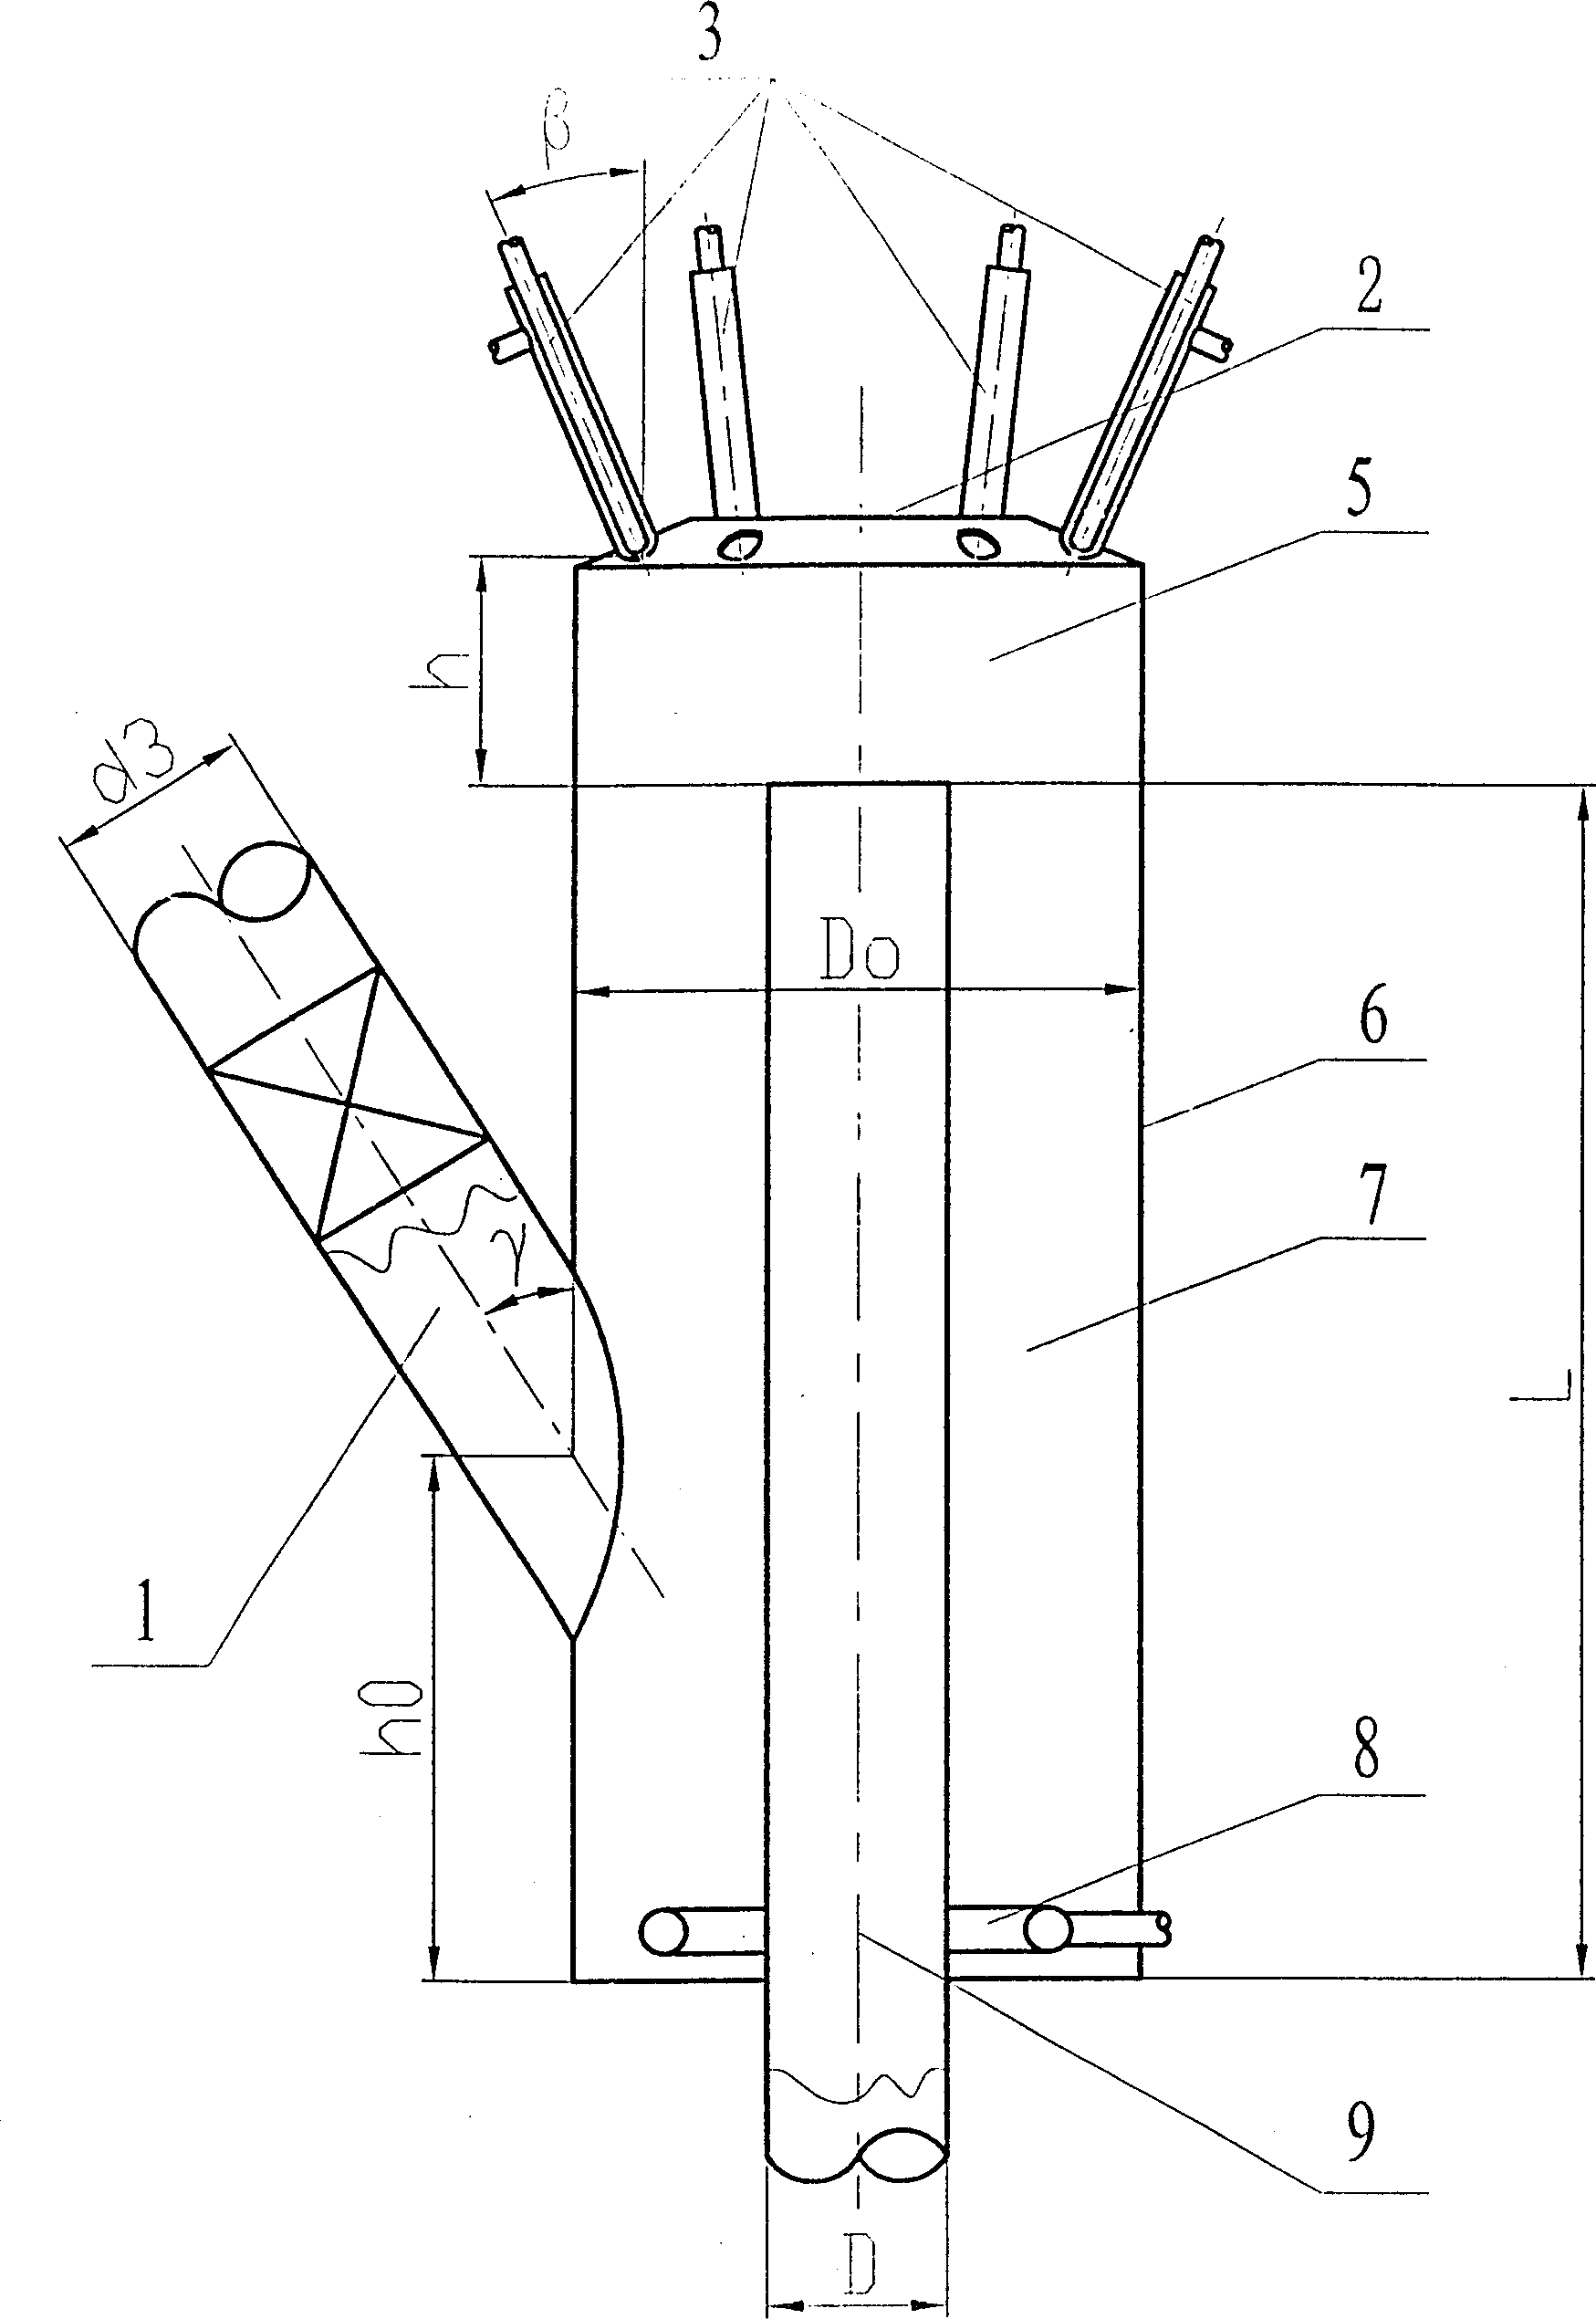 Desending catalytic cracking reactor and its application